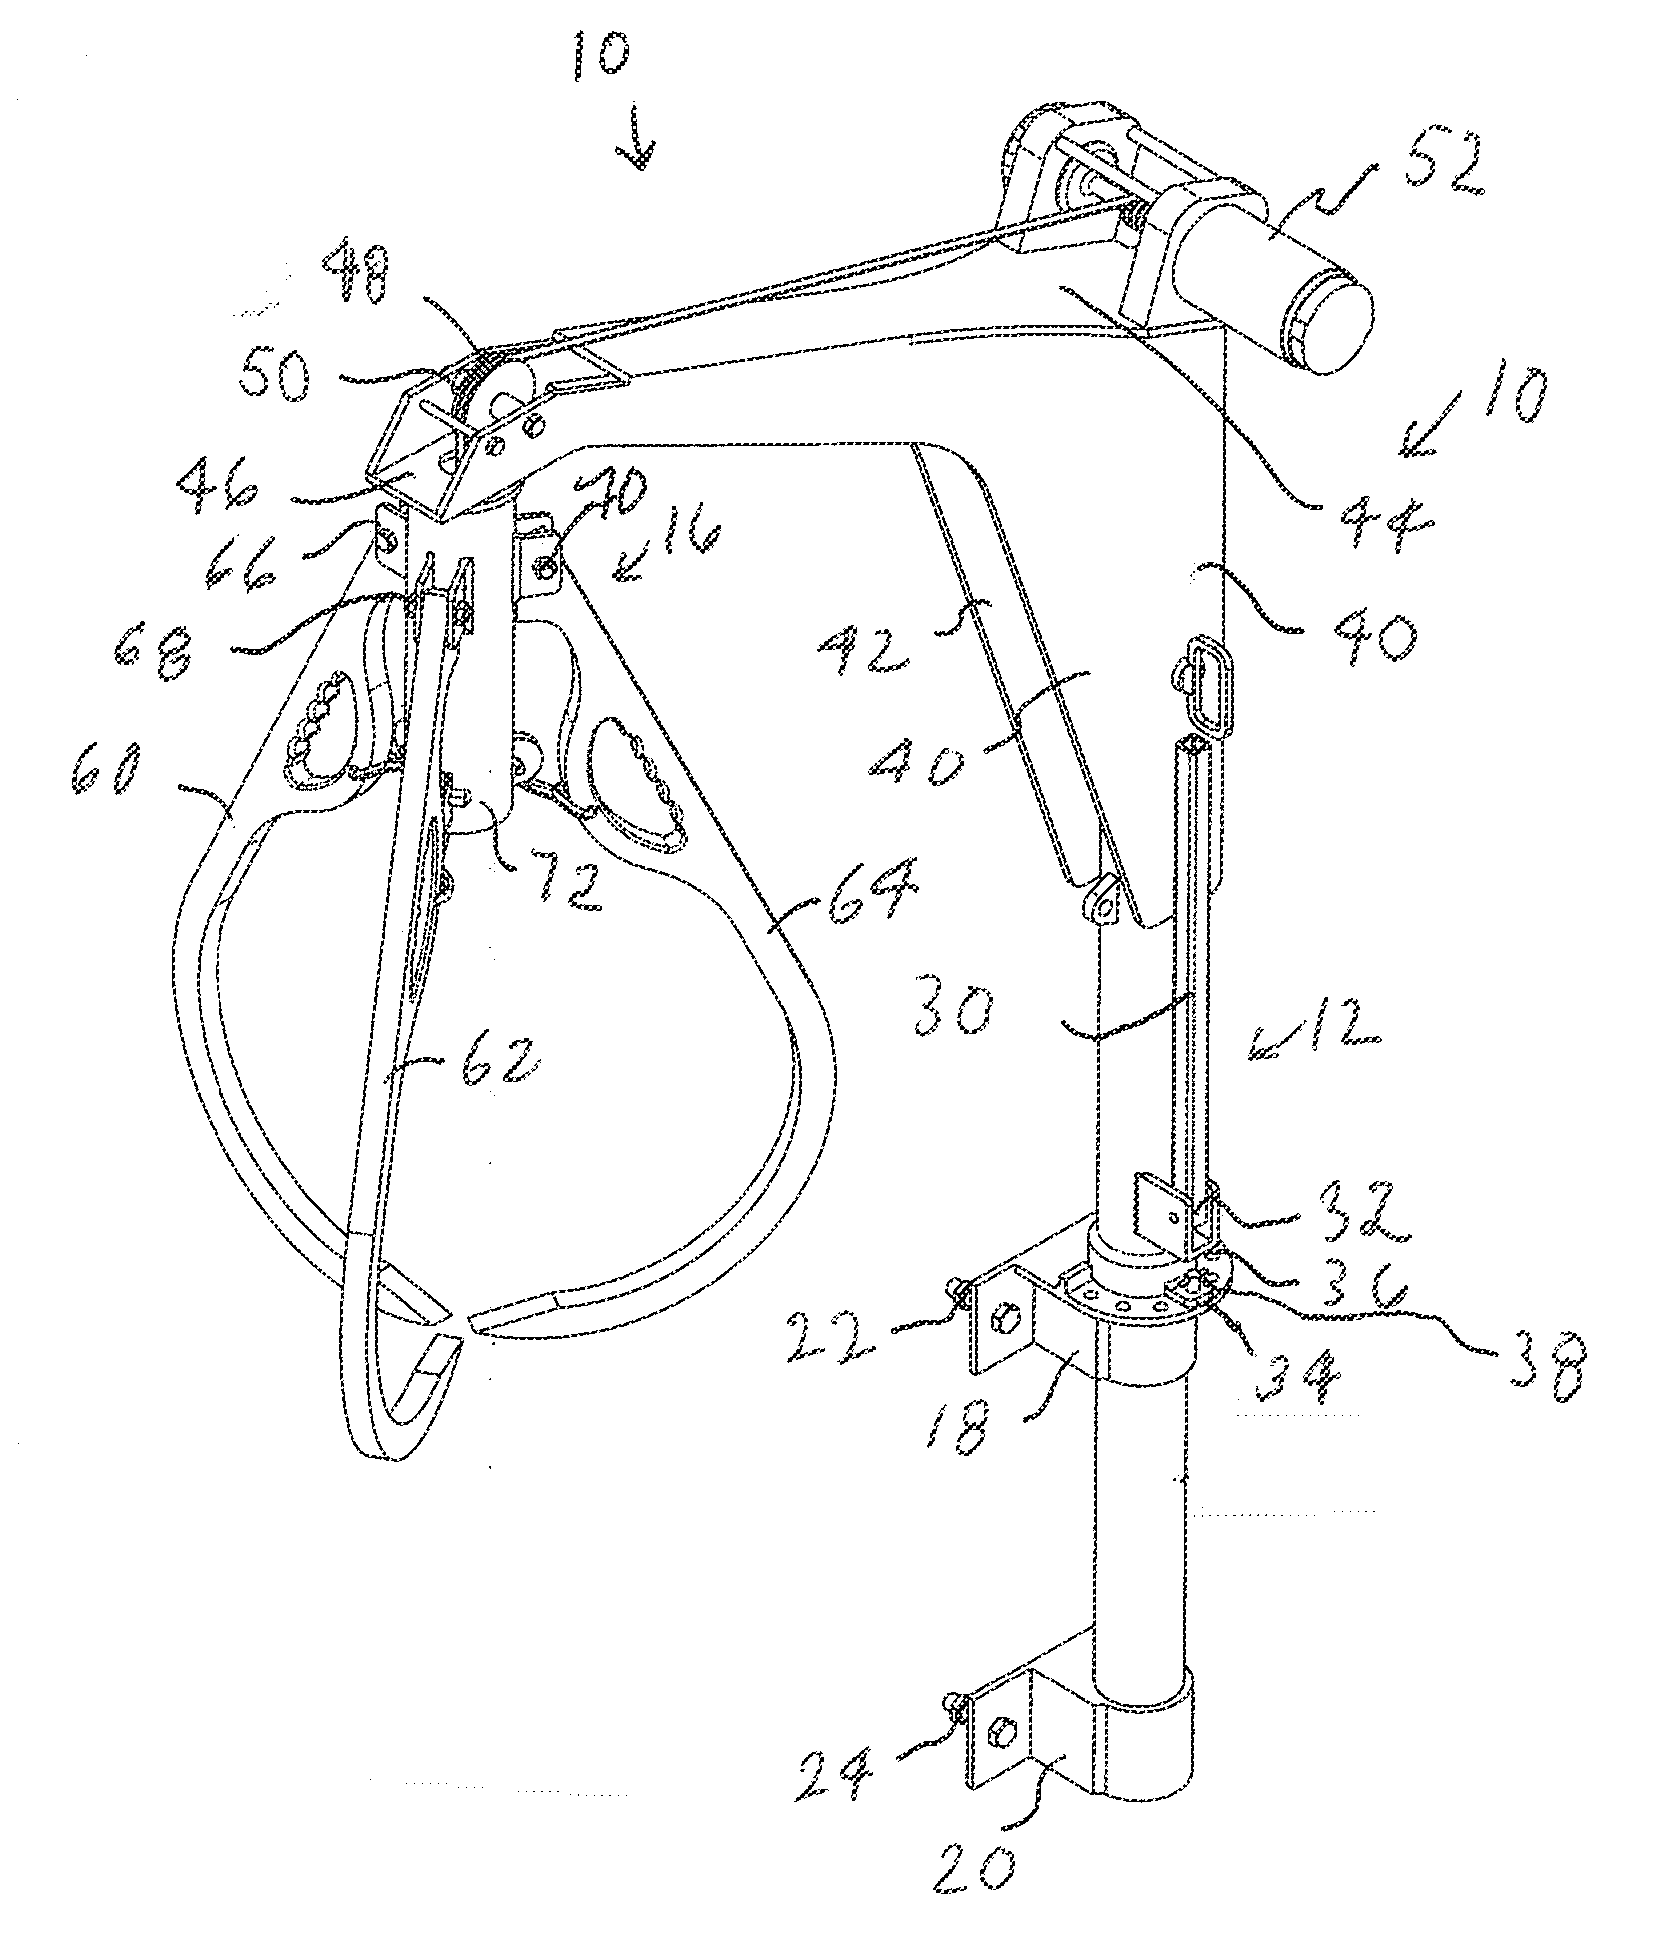 On-board grapple hoist for agriculture vehicle